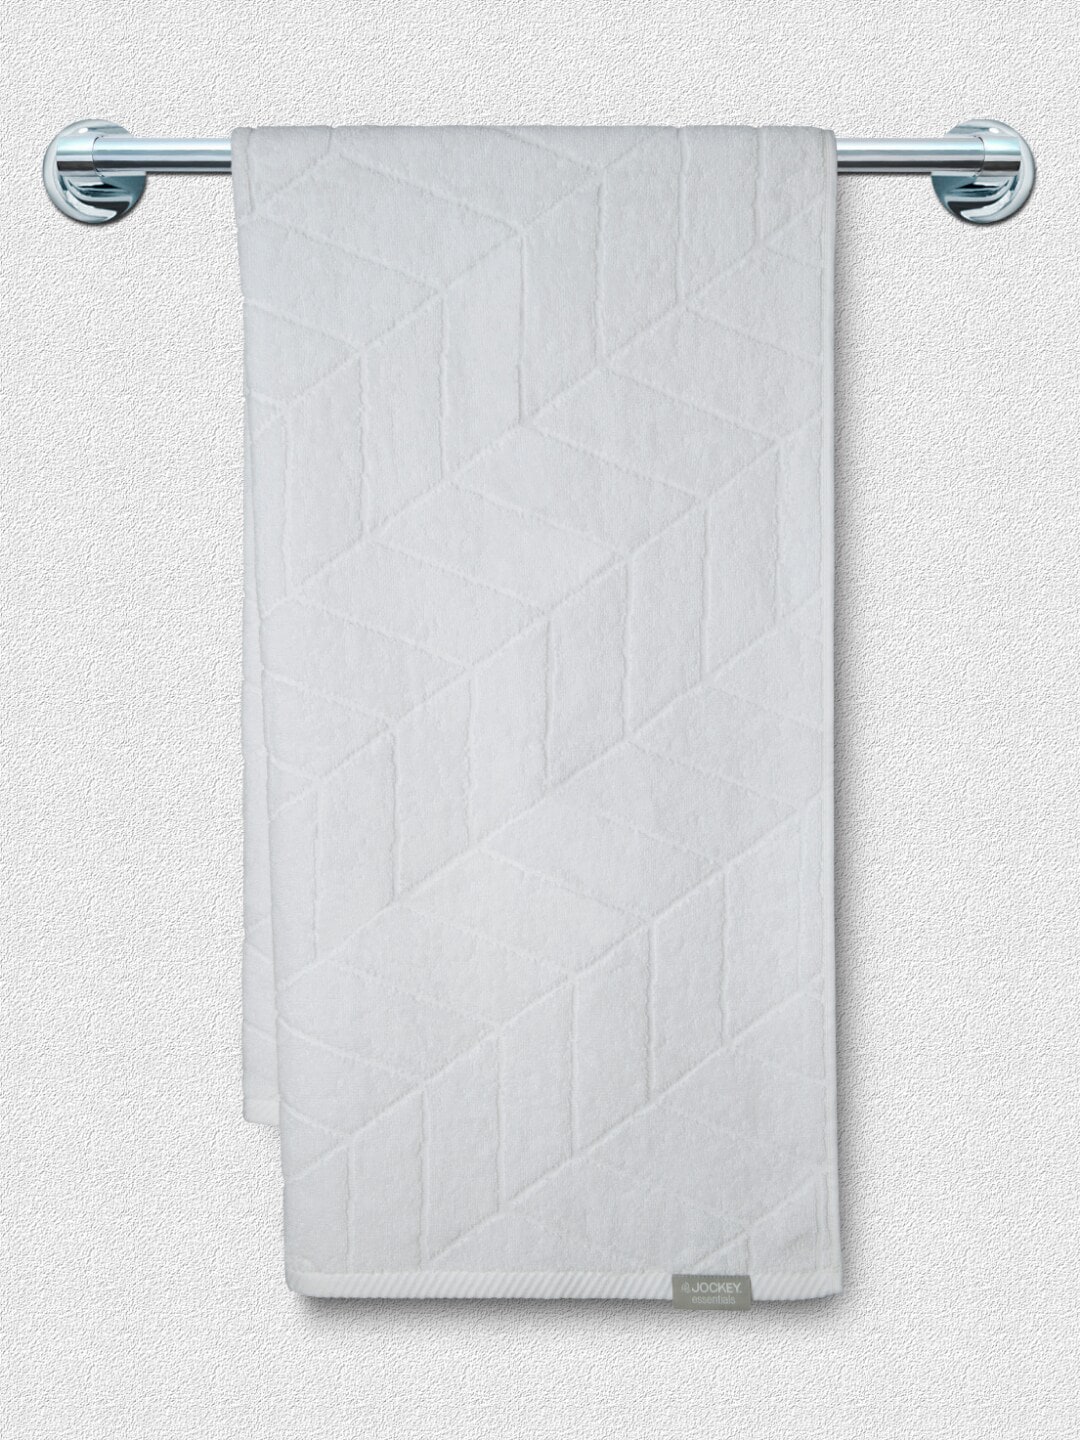 Jockey White Solid 450 GSM Bath Towel Price in India